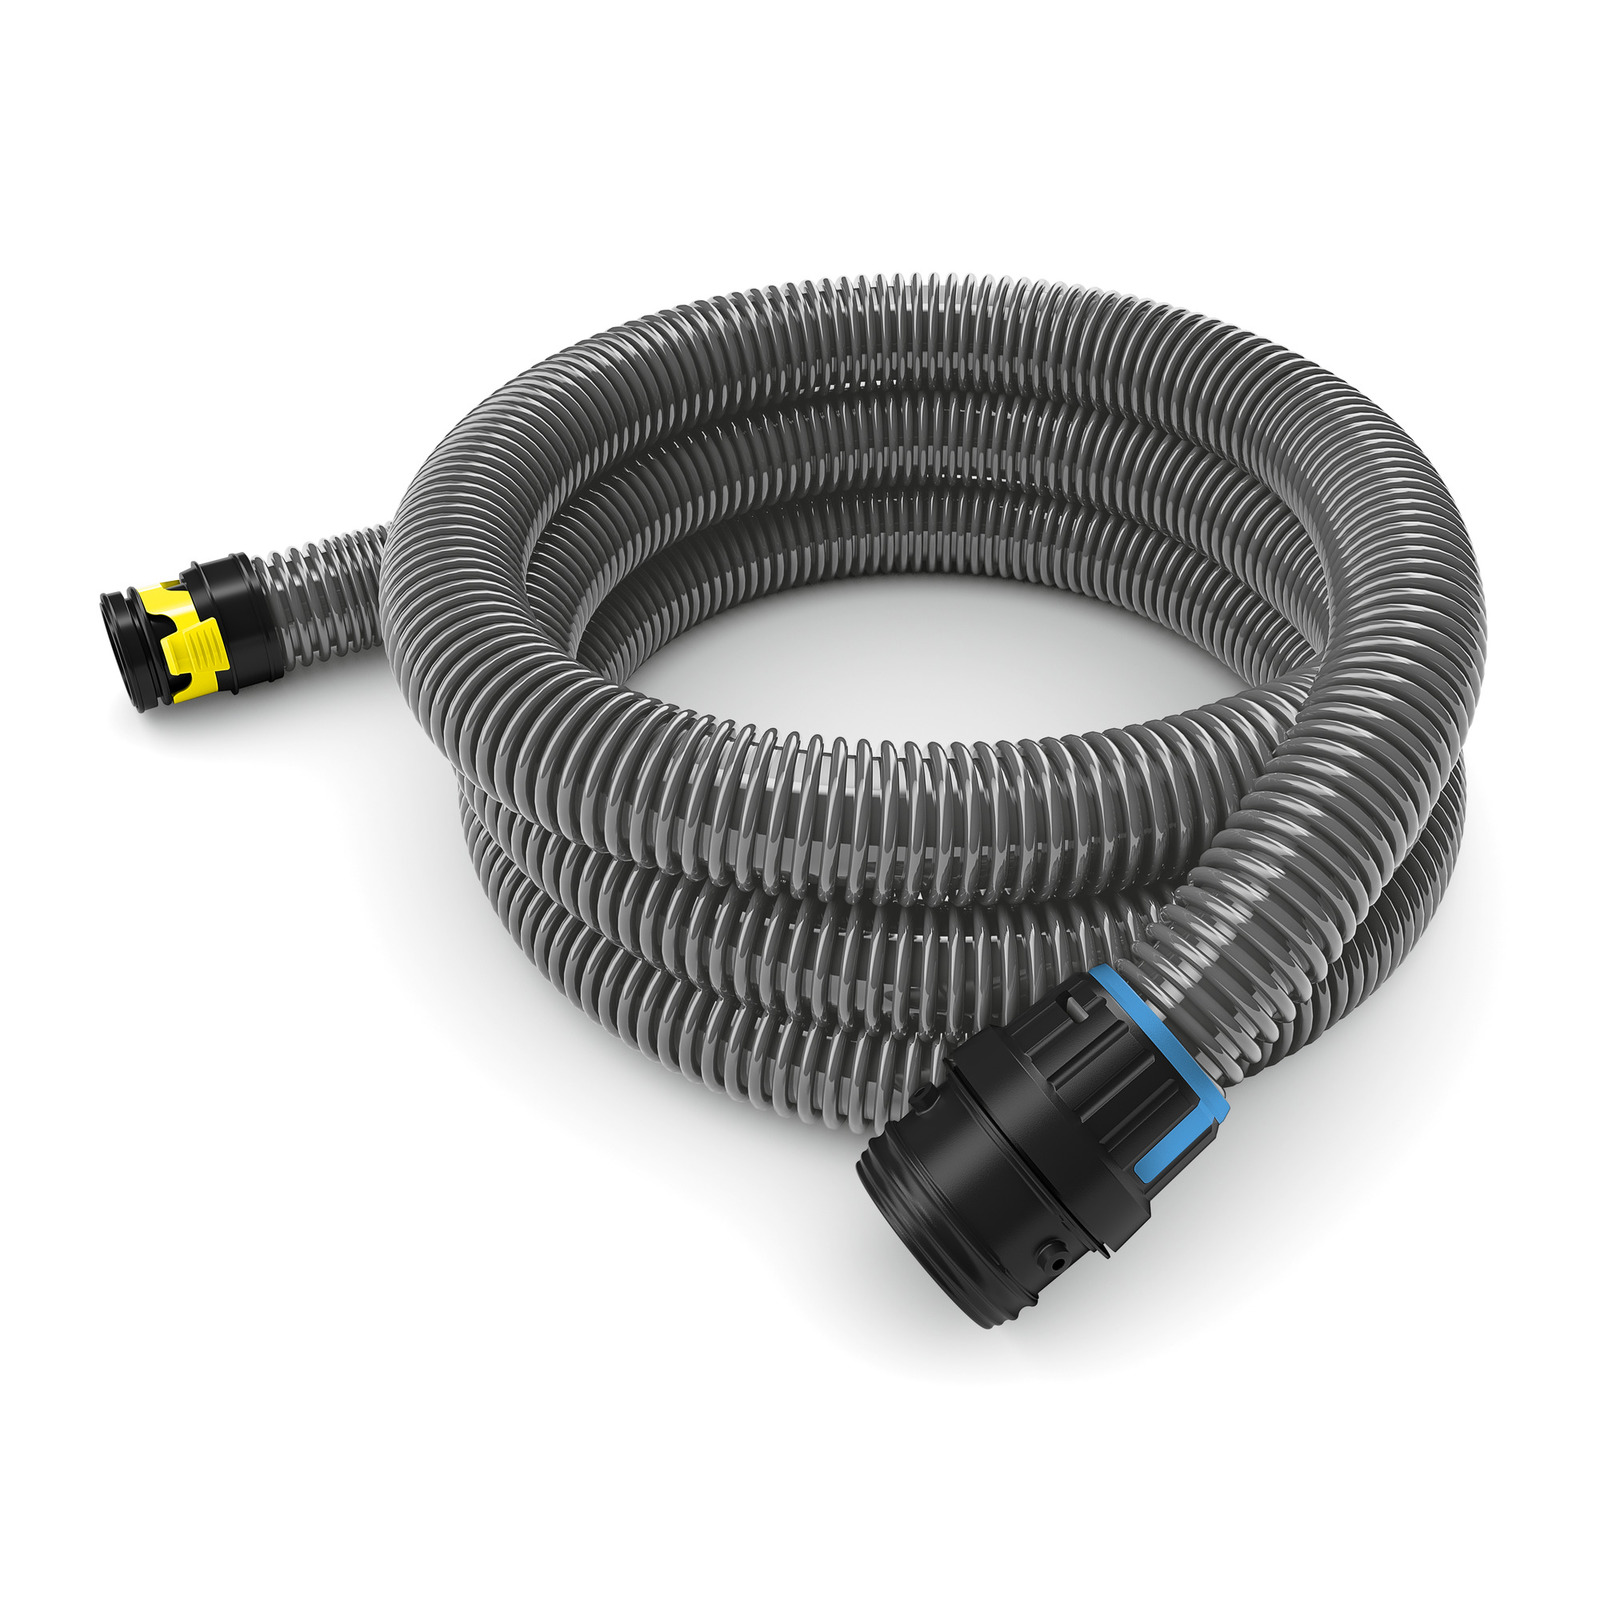 Industrial Vacuum Hoses and Tools